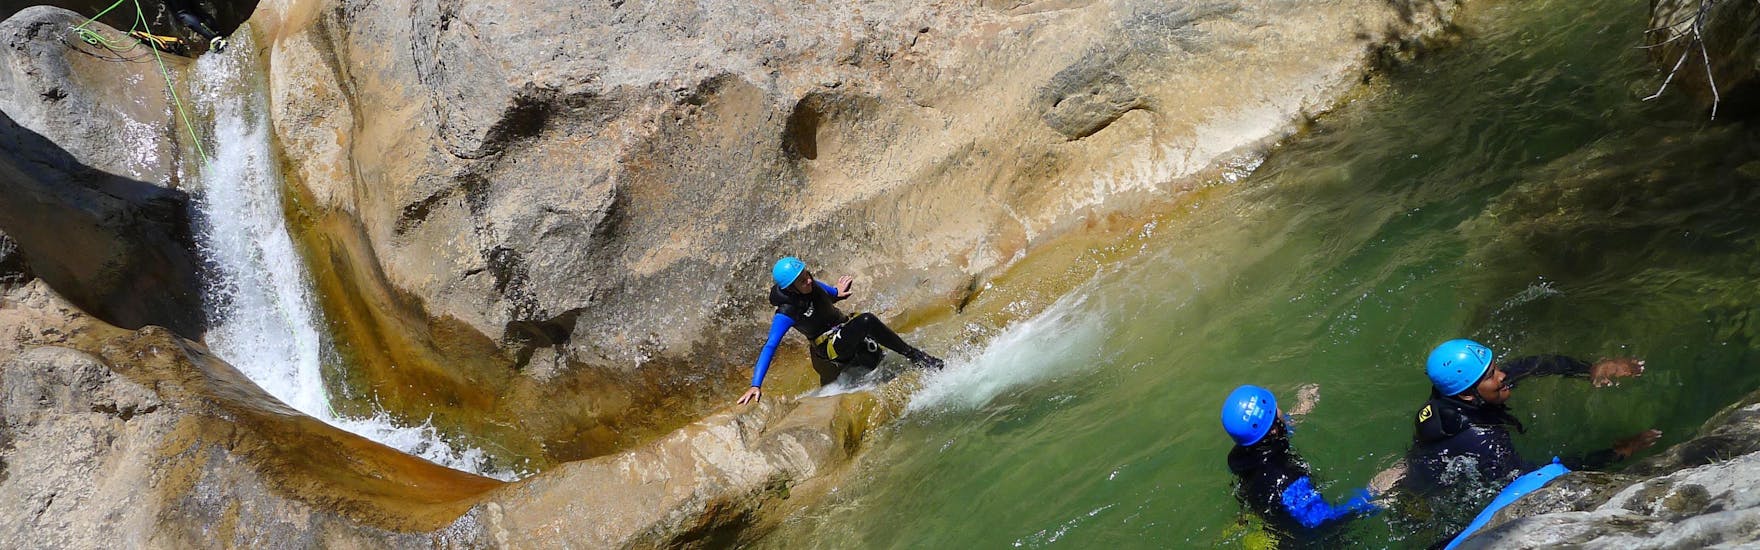 A girl is abseiling in the Canyon d'Arlos during the Canyoning Discovery with H2O vives.